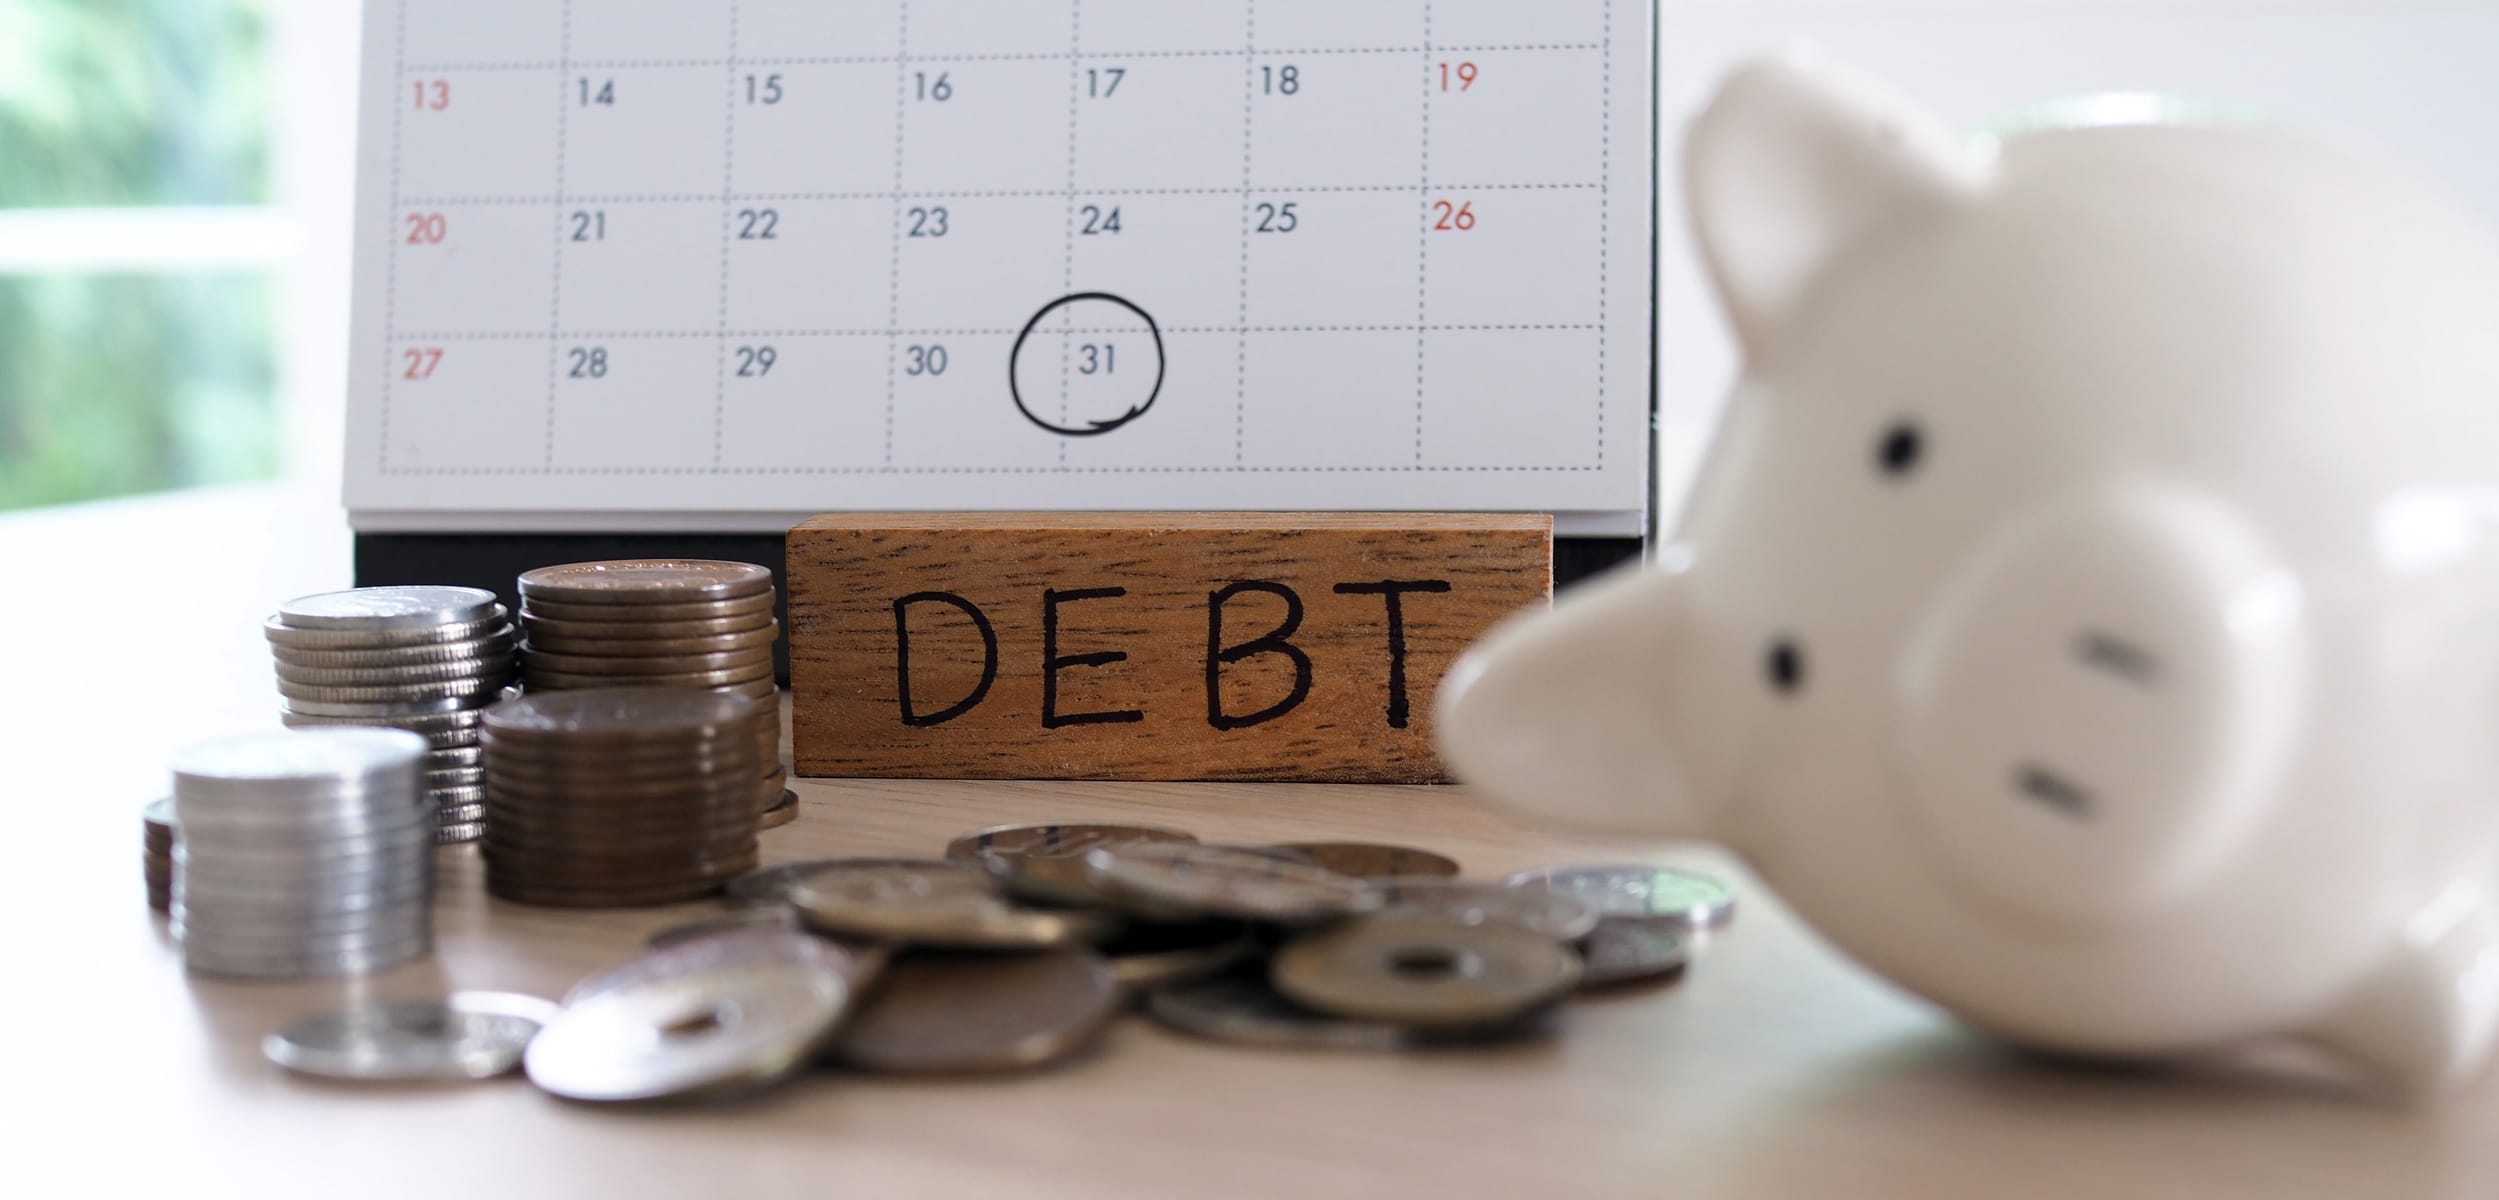 Pay off debt or save. Due for repayment There are coins, calculators and calendar reminders placed on the table.